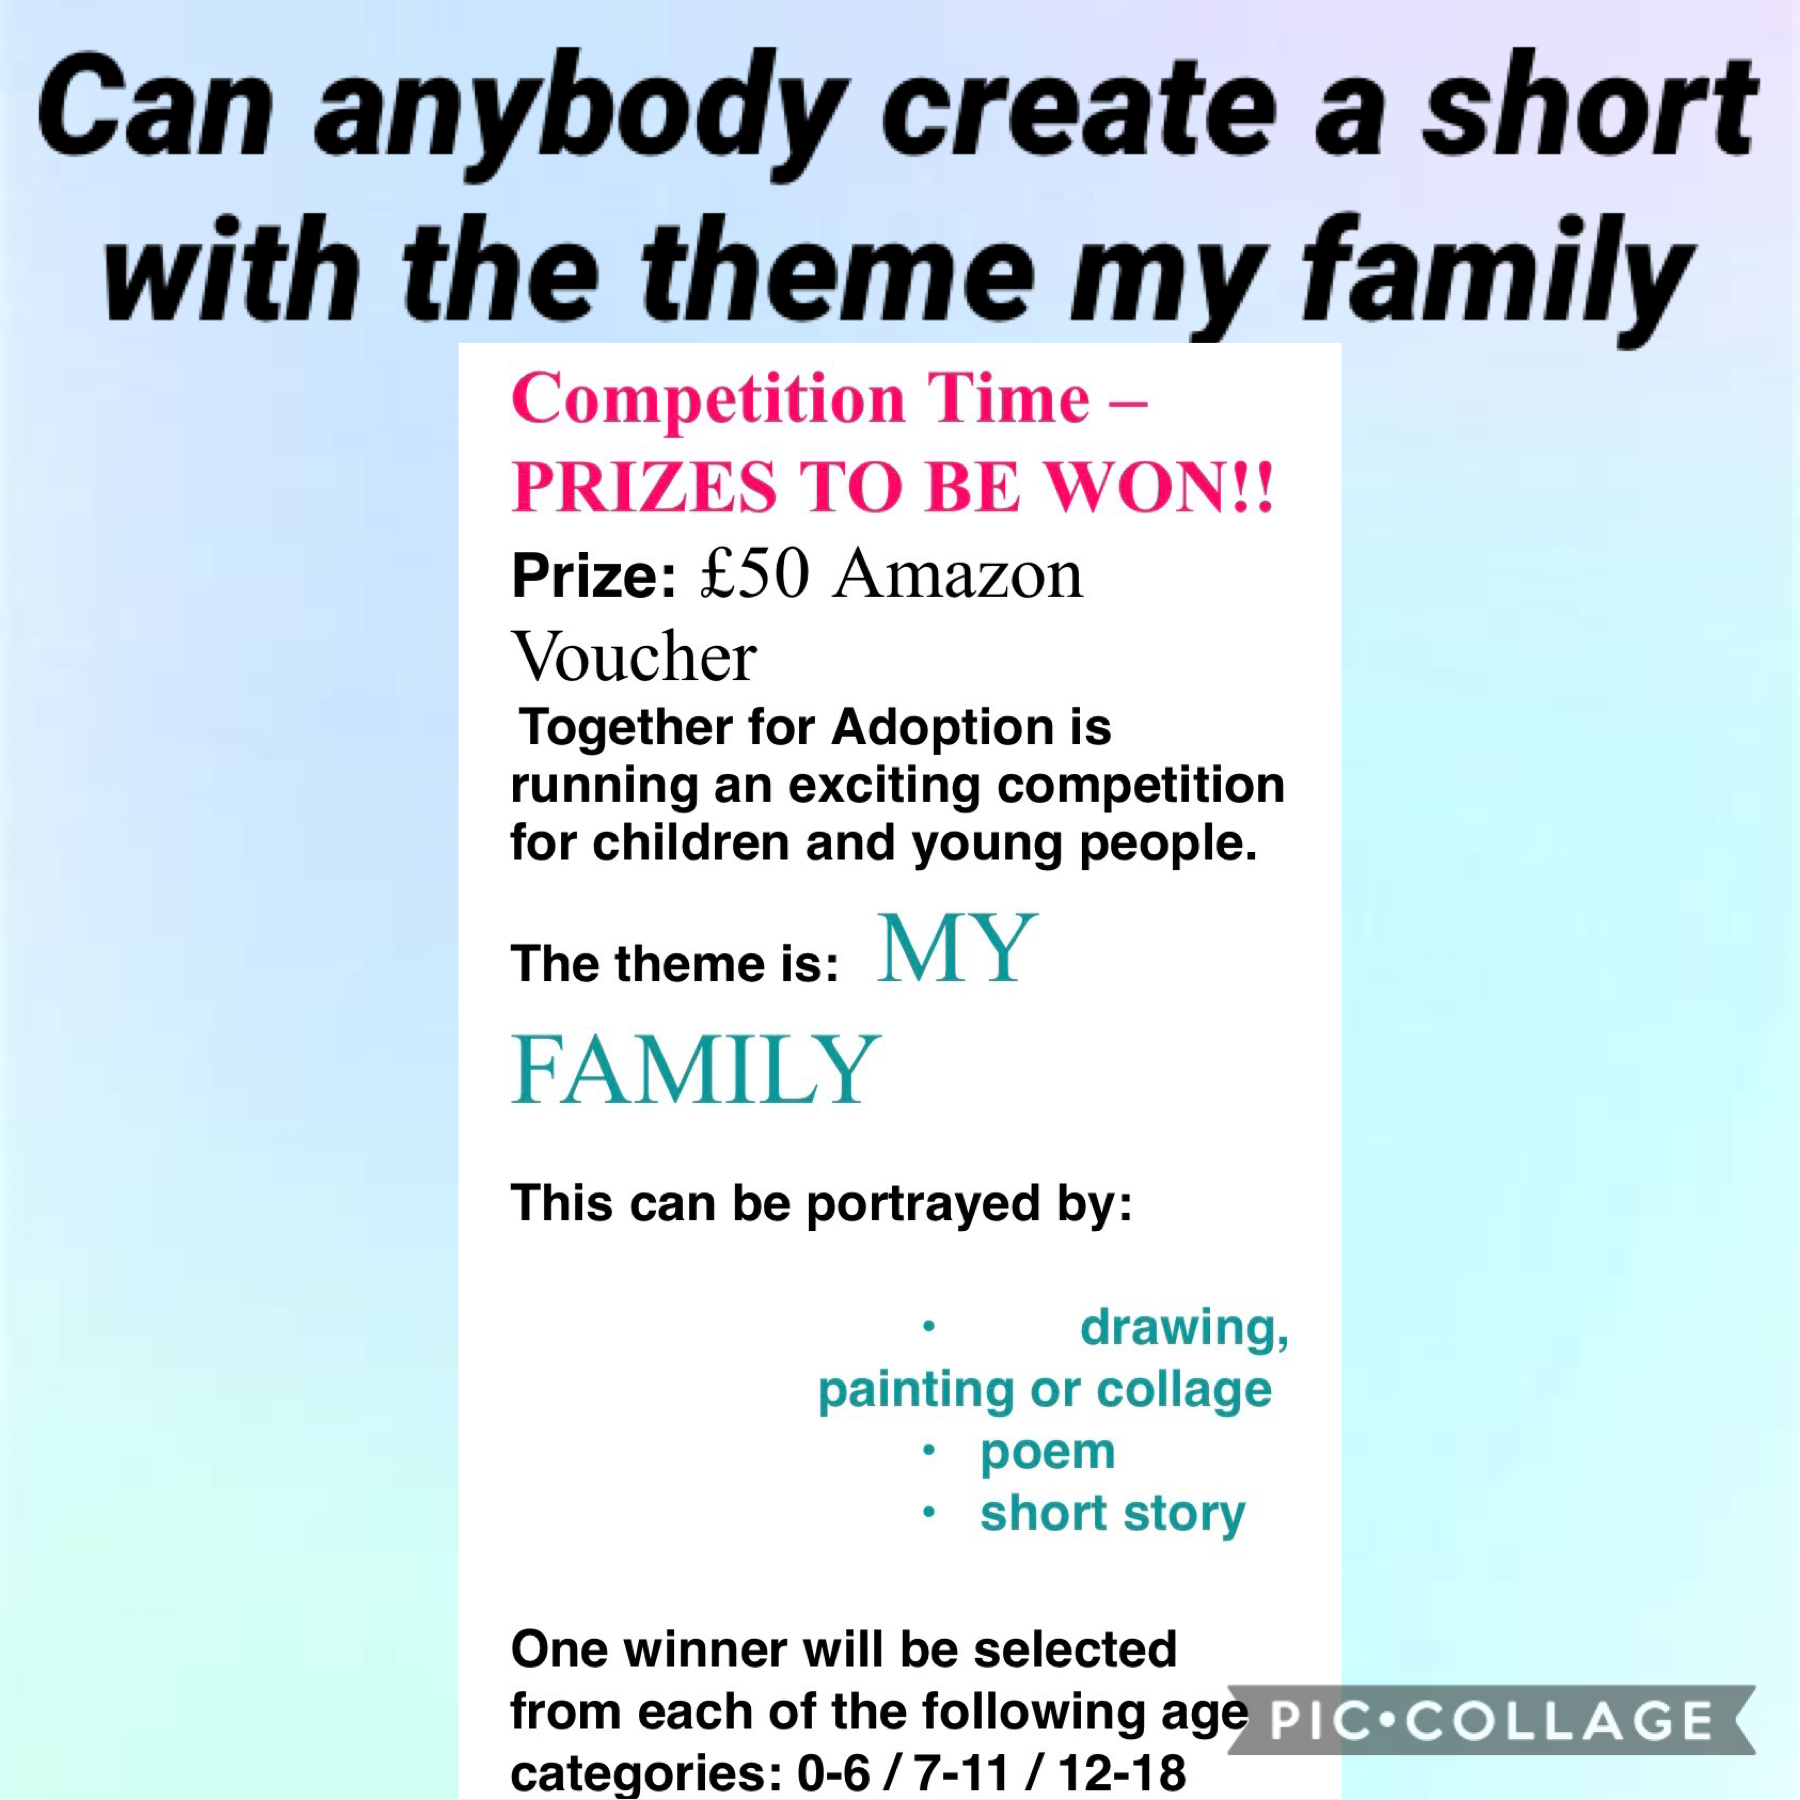 Please comment,like and remix I would love to give the prize to my mum.